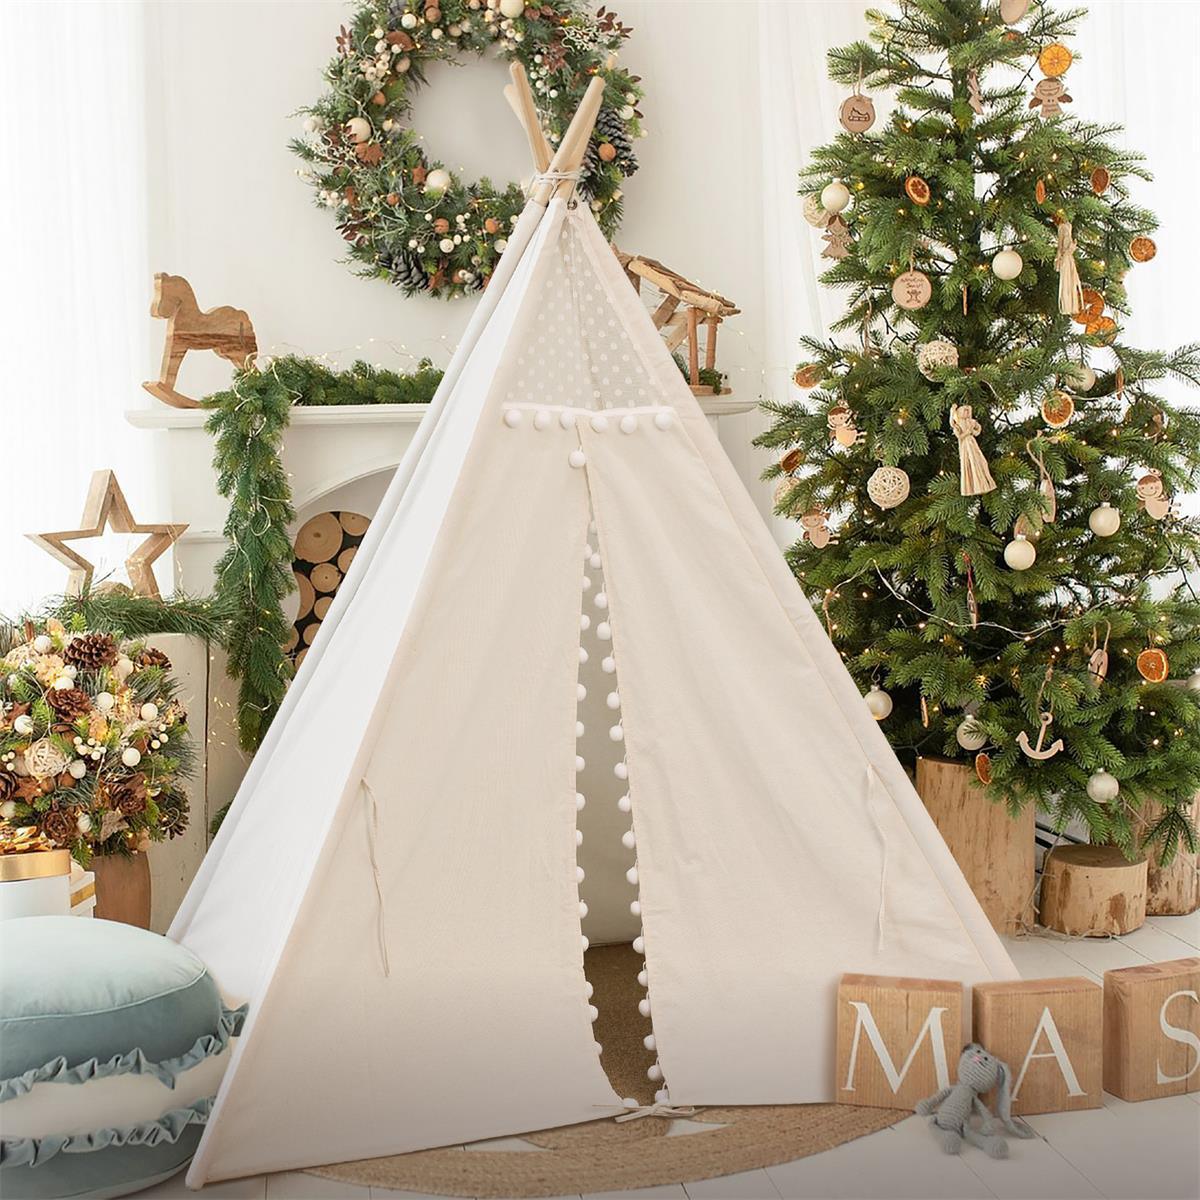 teepee tent for kids